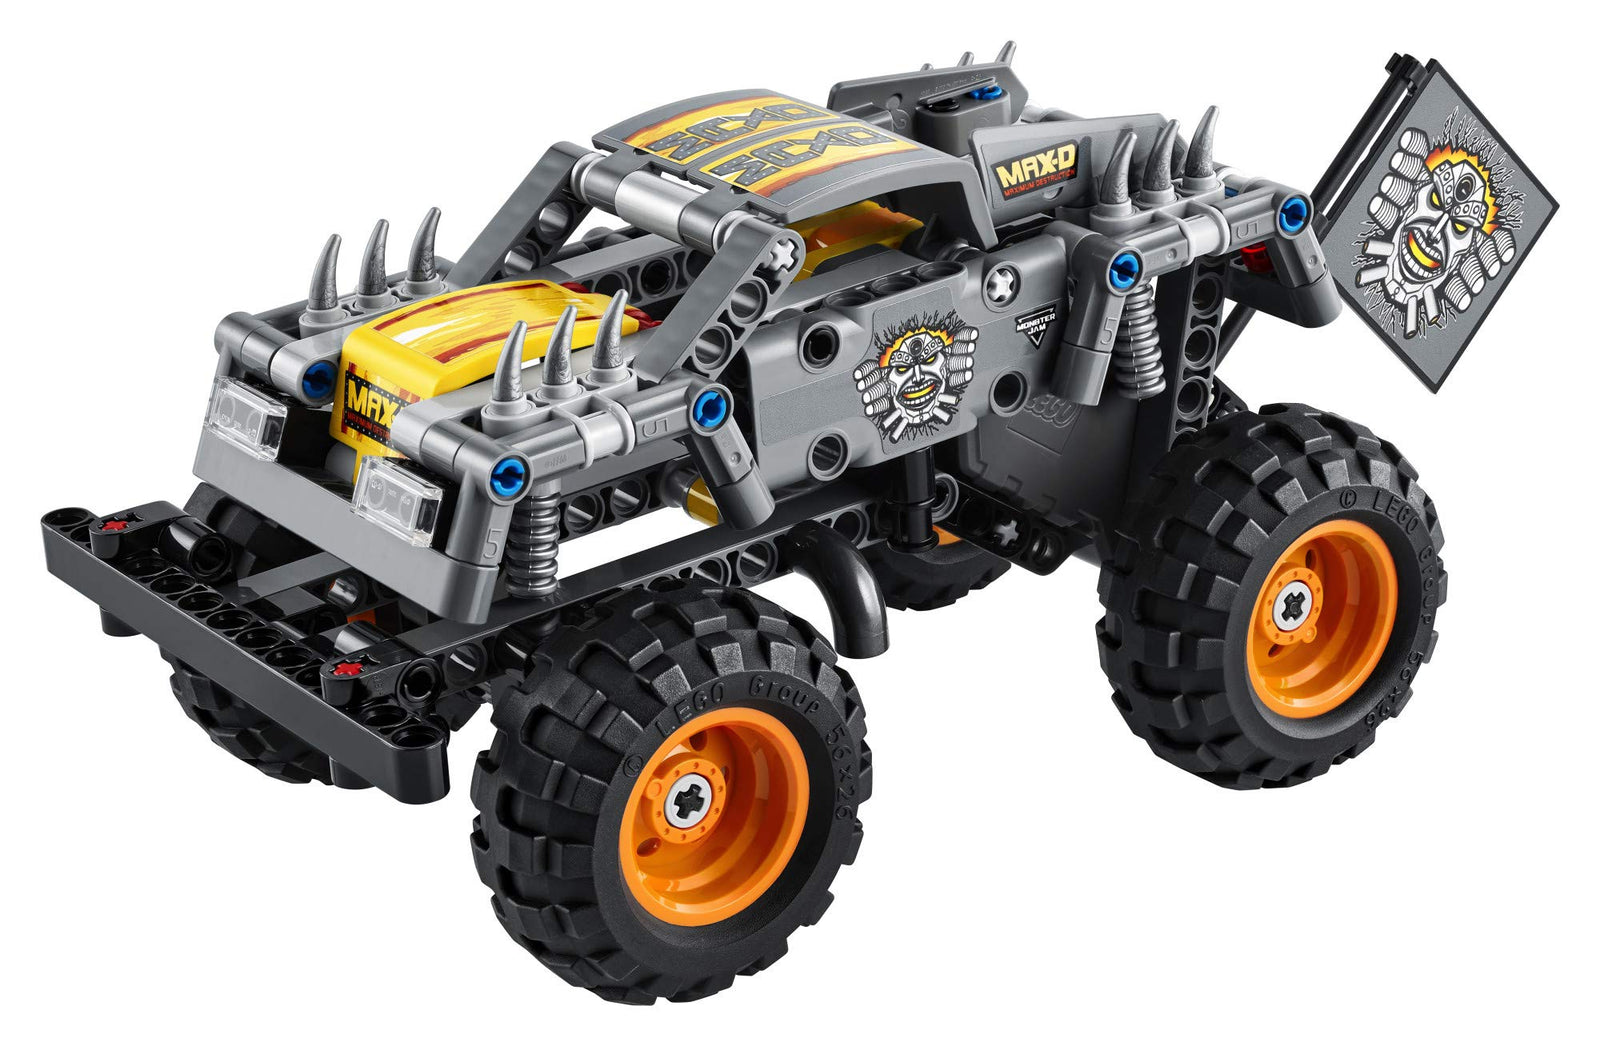 LEGO Technic Monster Jam Max-D 42119 Model Building Kit for Boys and Girls Who Love Monster Truck Toys, New 2021 (230 Pieces)